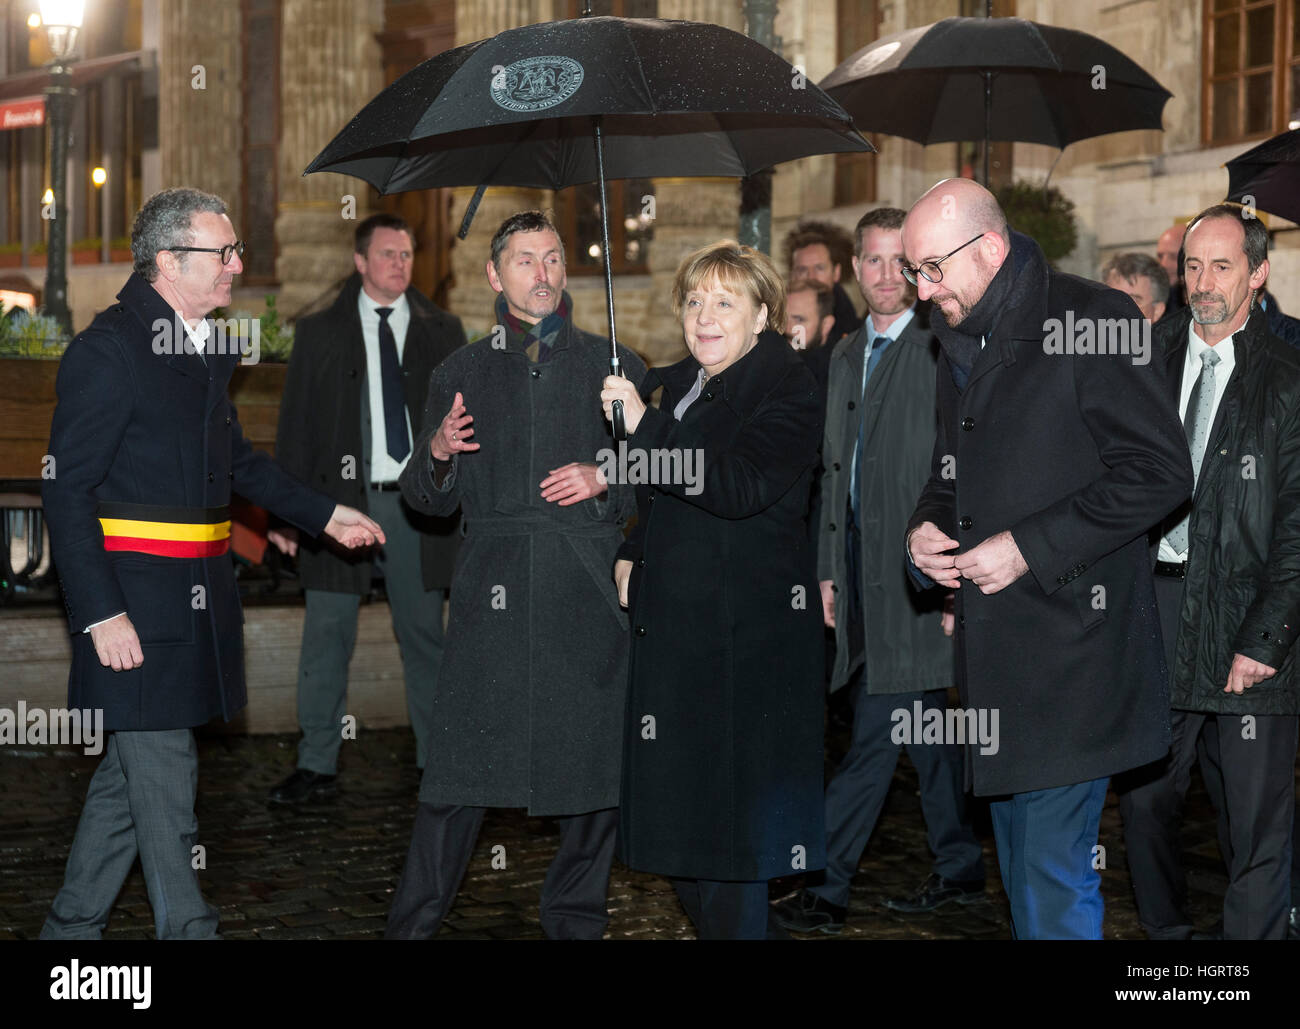 Brussels, Belgium. 12th Jan, 2017. The German Chancellor Angela Merkel (CDU) with the Belgian Prime Minister Charles Michel (2-R) and the Mayor of Brussels Yvan Mayeur (L) in front of the Grand Palace in Brussels, Belgium, 12 January 2017. Photo: Thierry Monasse/dpa/Alamy Live News Stock Photo